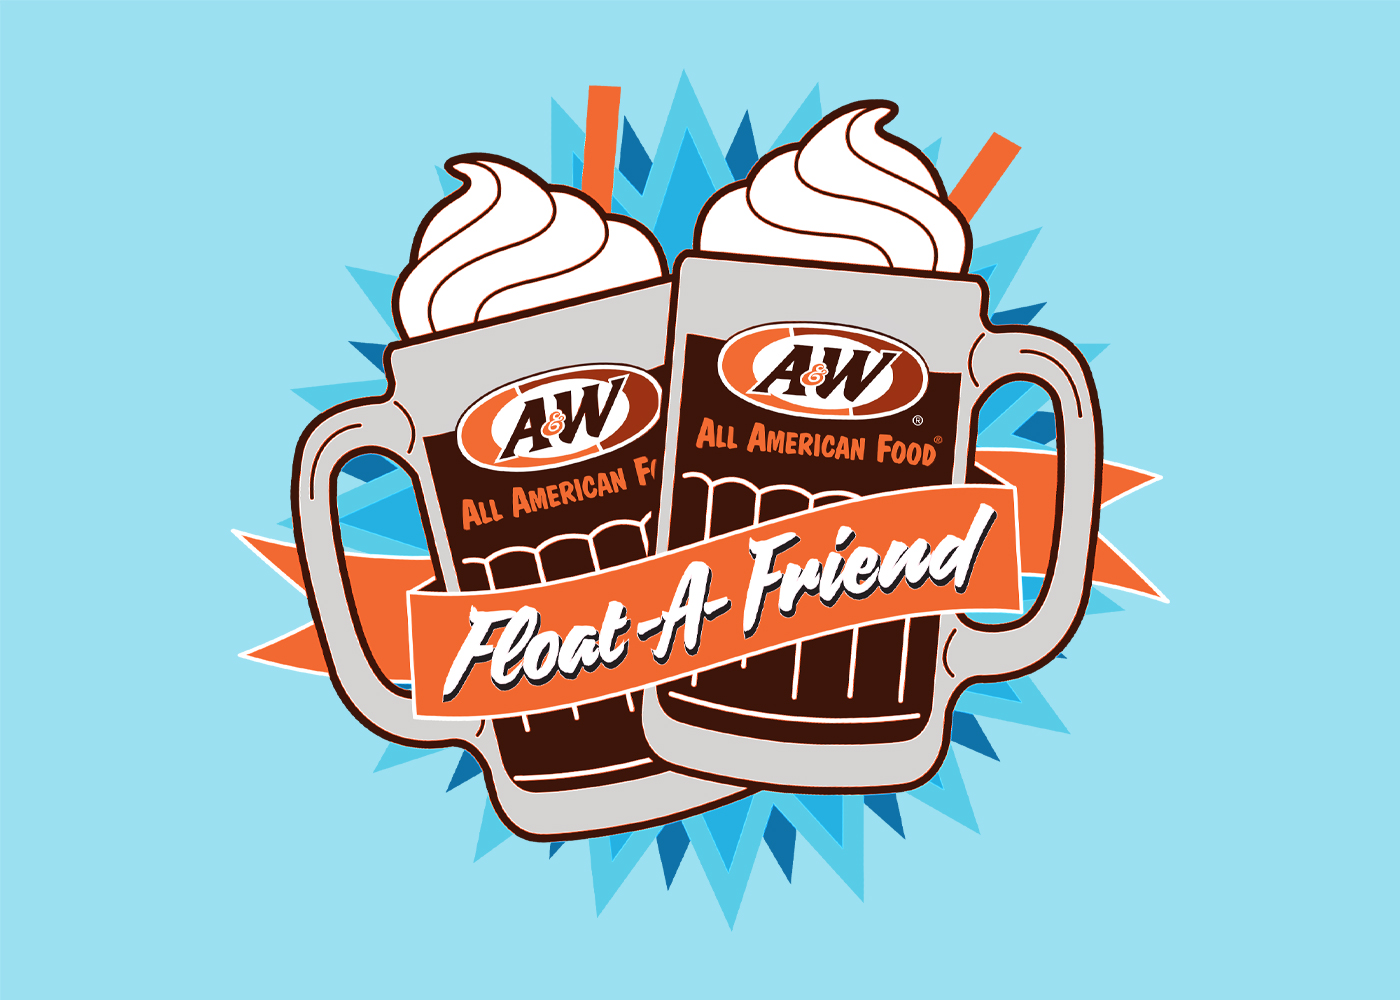 Background is light blue. Drawing of two A&W Root Beer Floats in the center with orange ribbon overlaid. Text inside ribbon is white and reads 